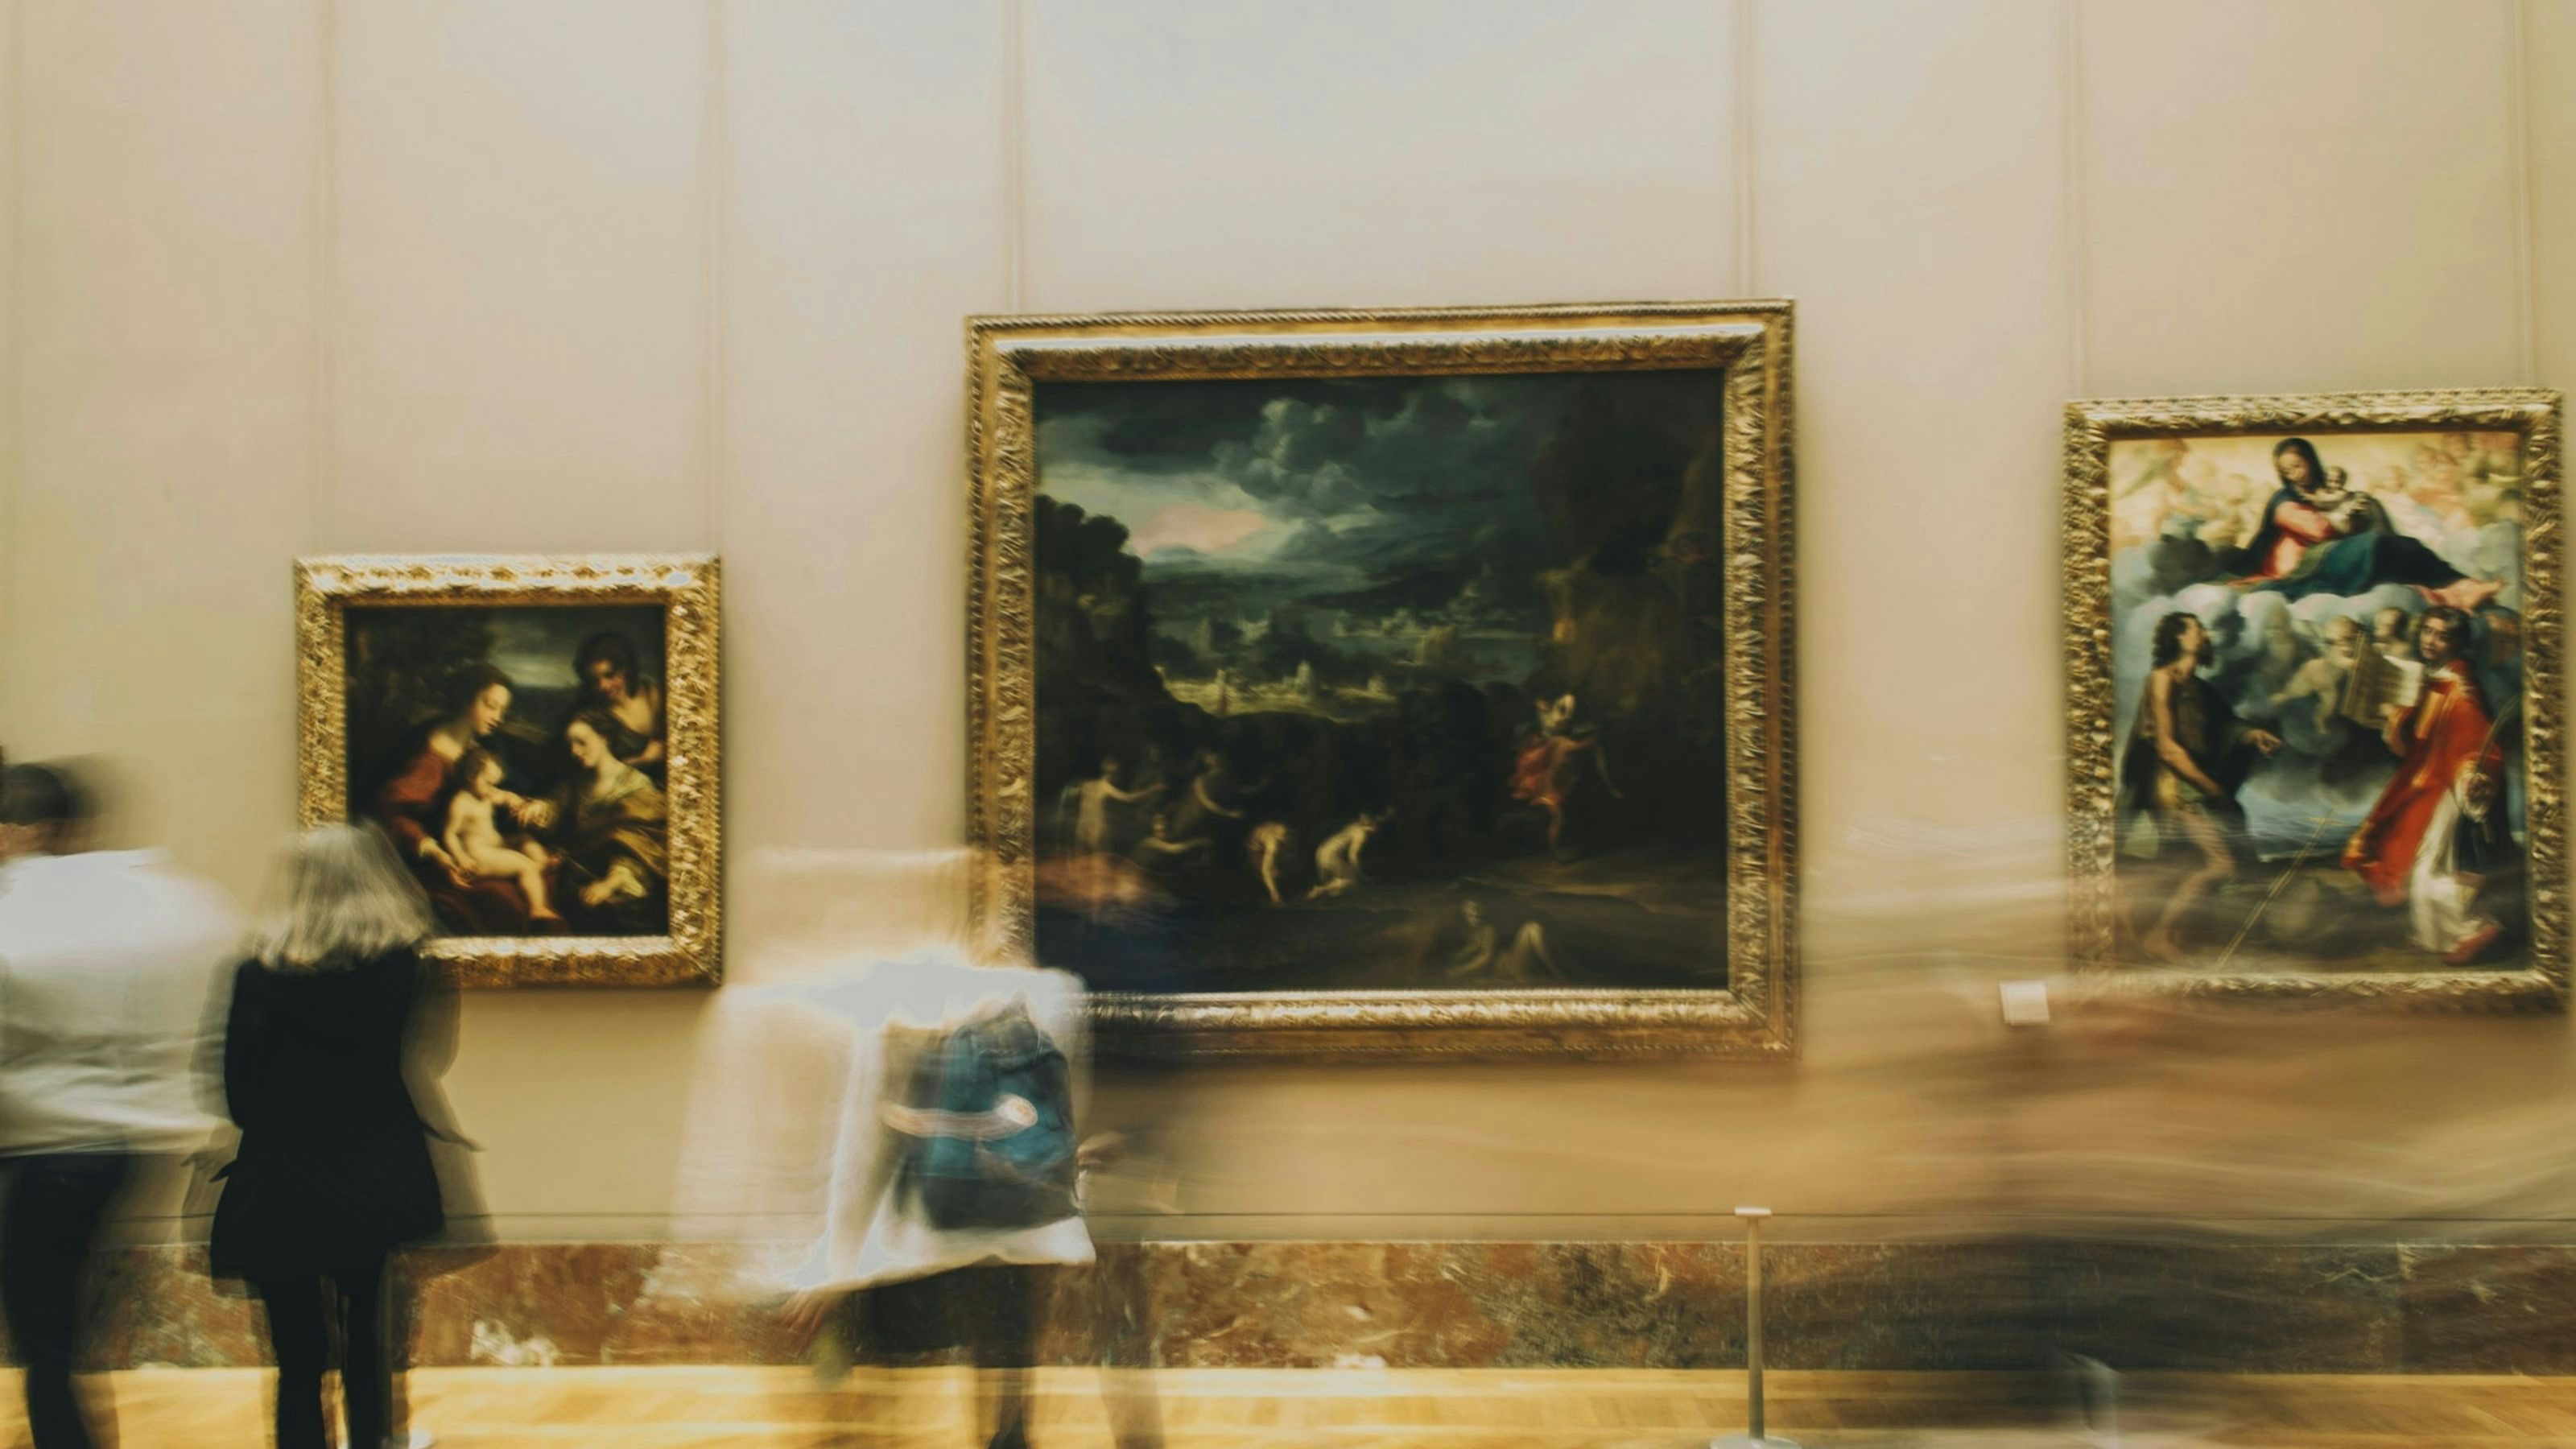 People looking at art in a museum